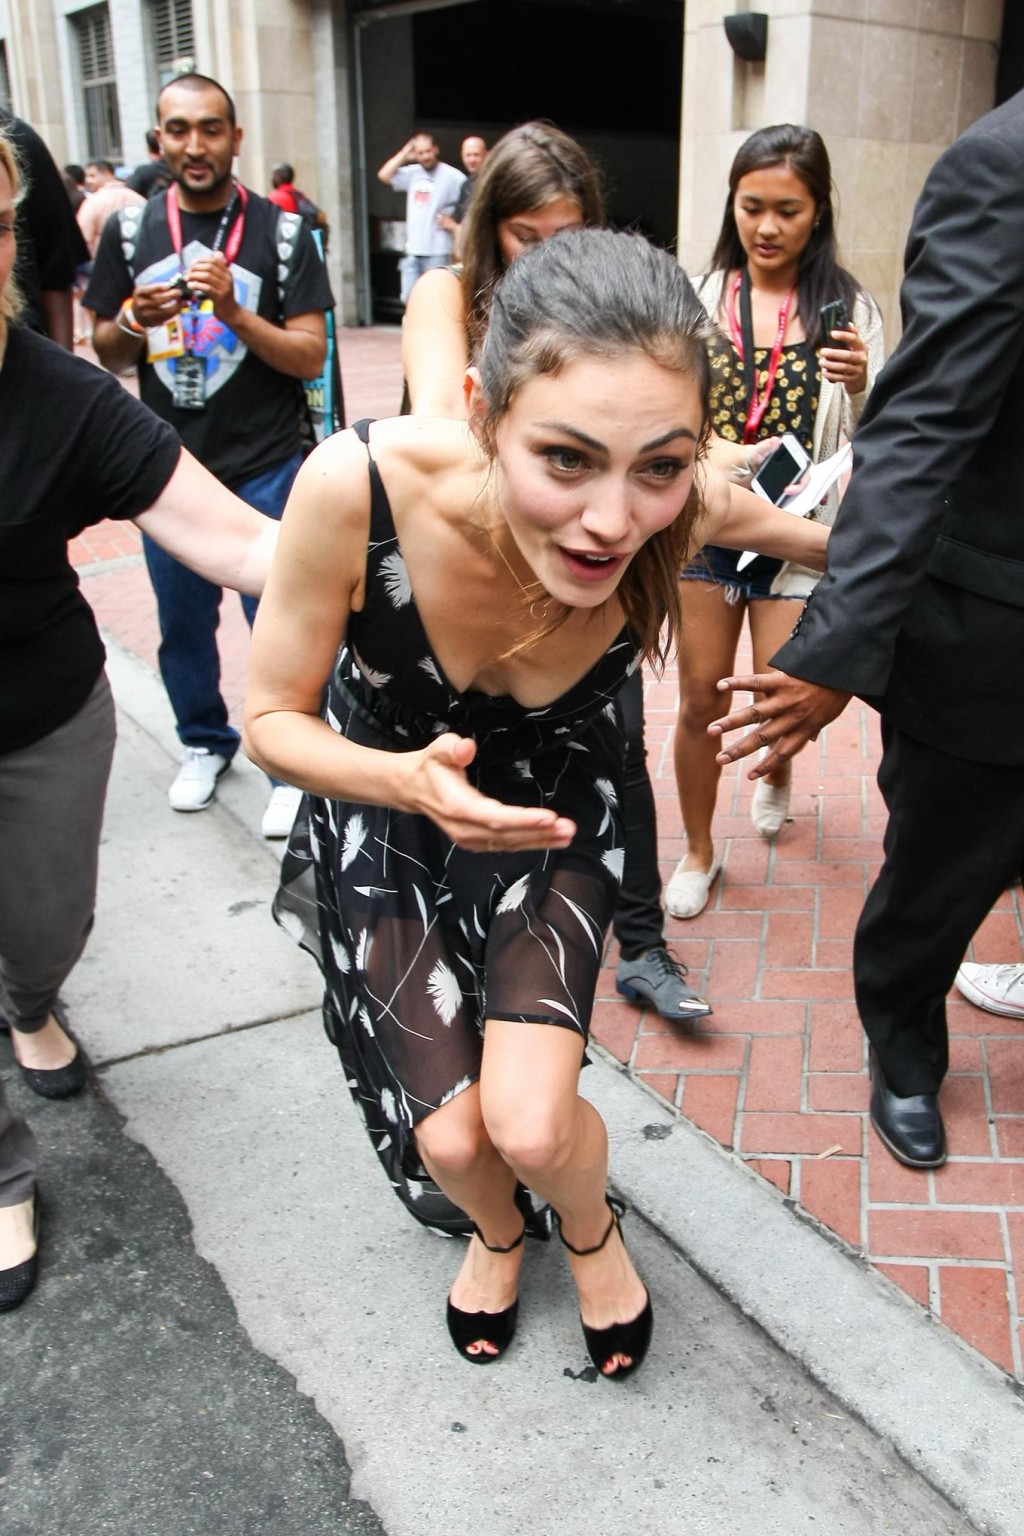 Phoebe Tonkin braless downblouse while loosing balance at Comic Con in San Diego #75189365